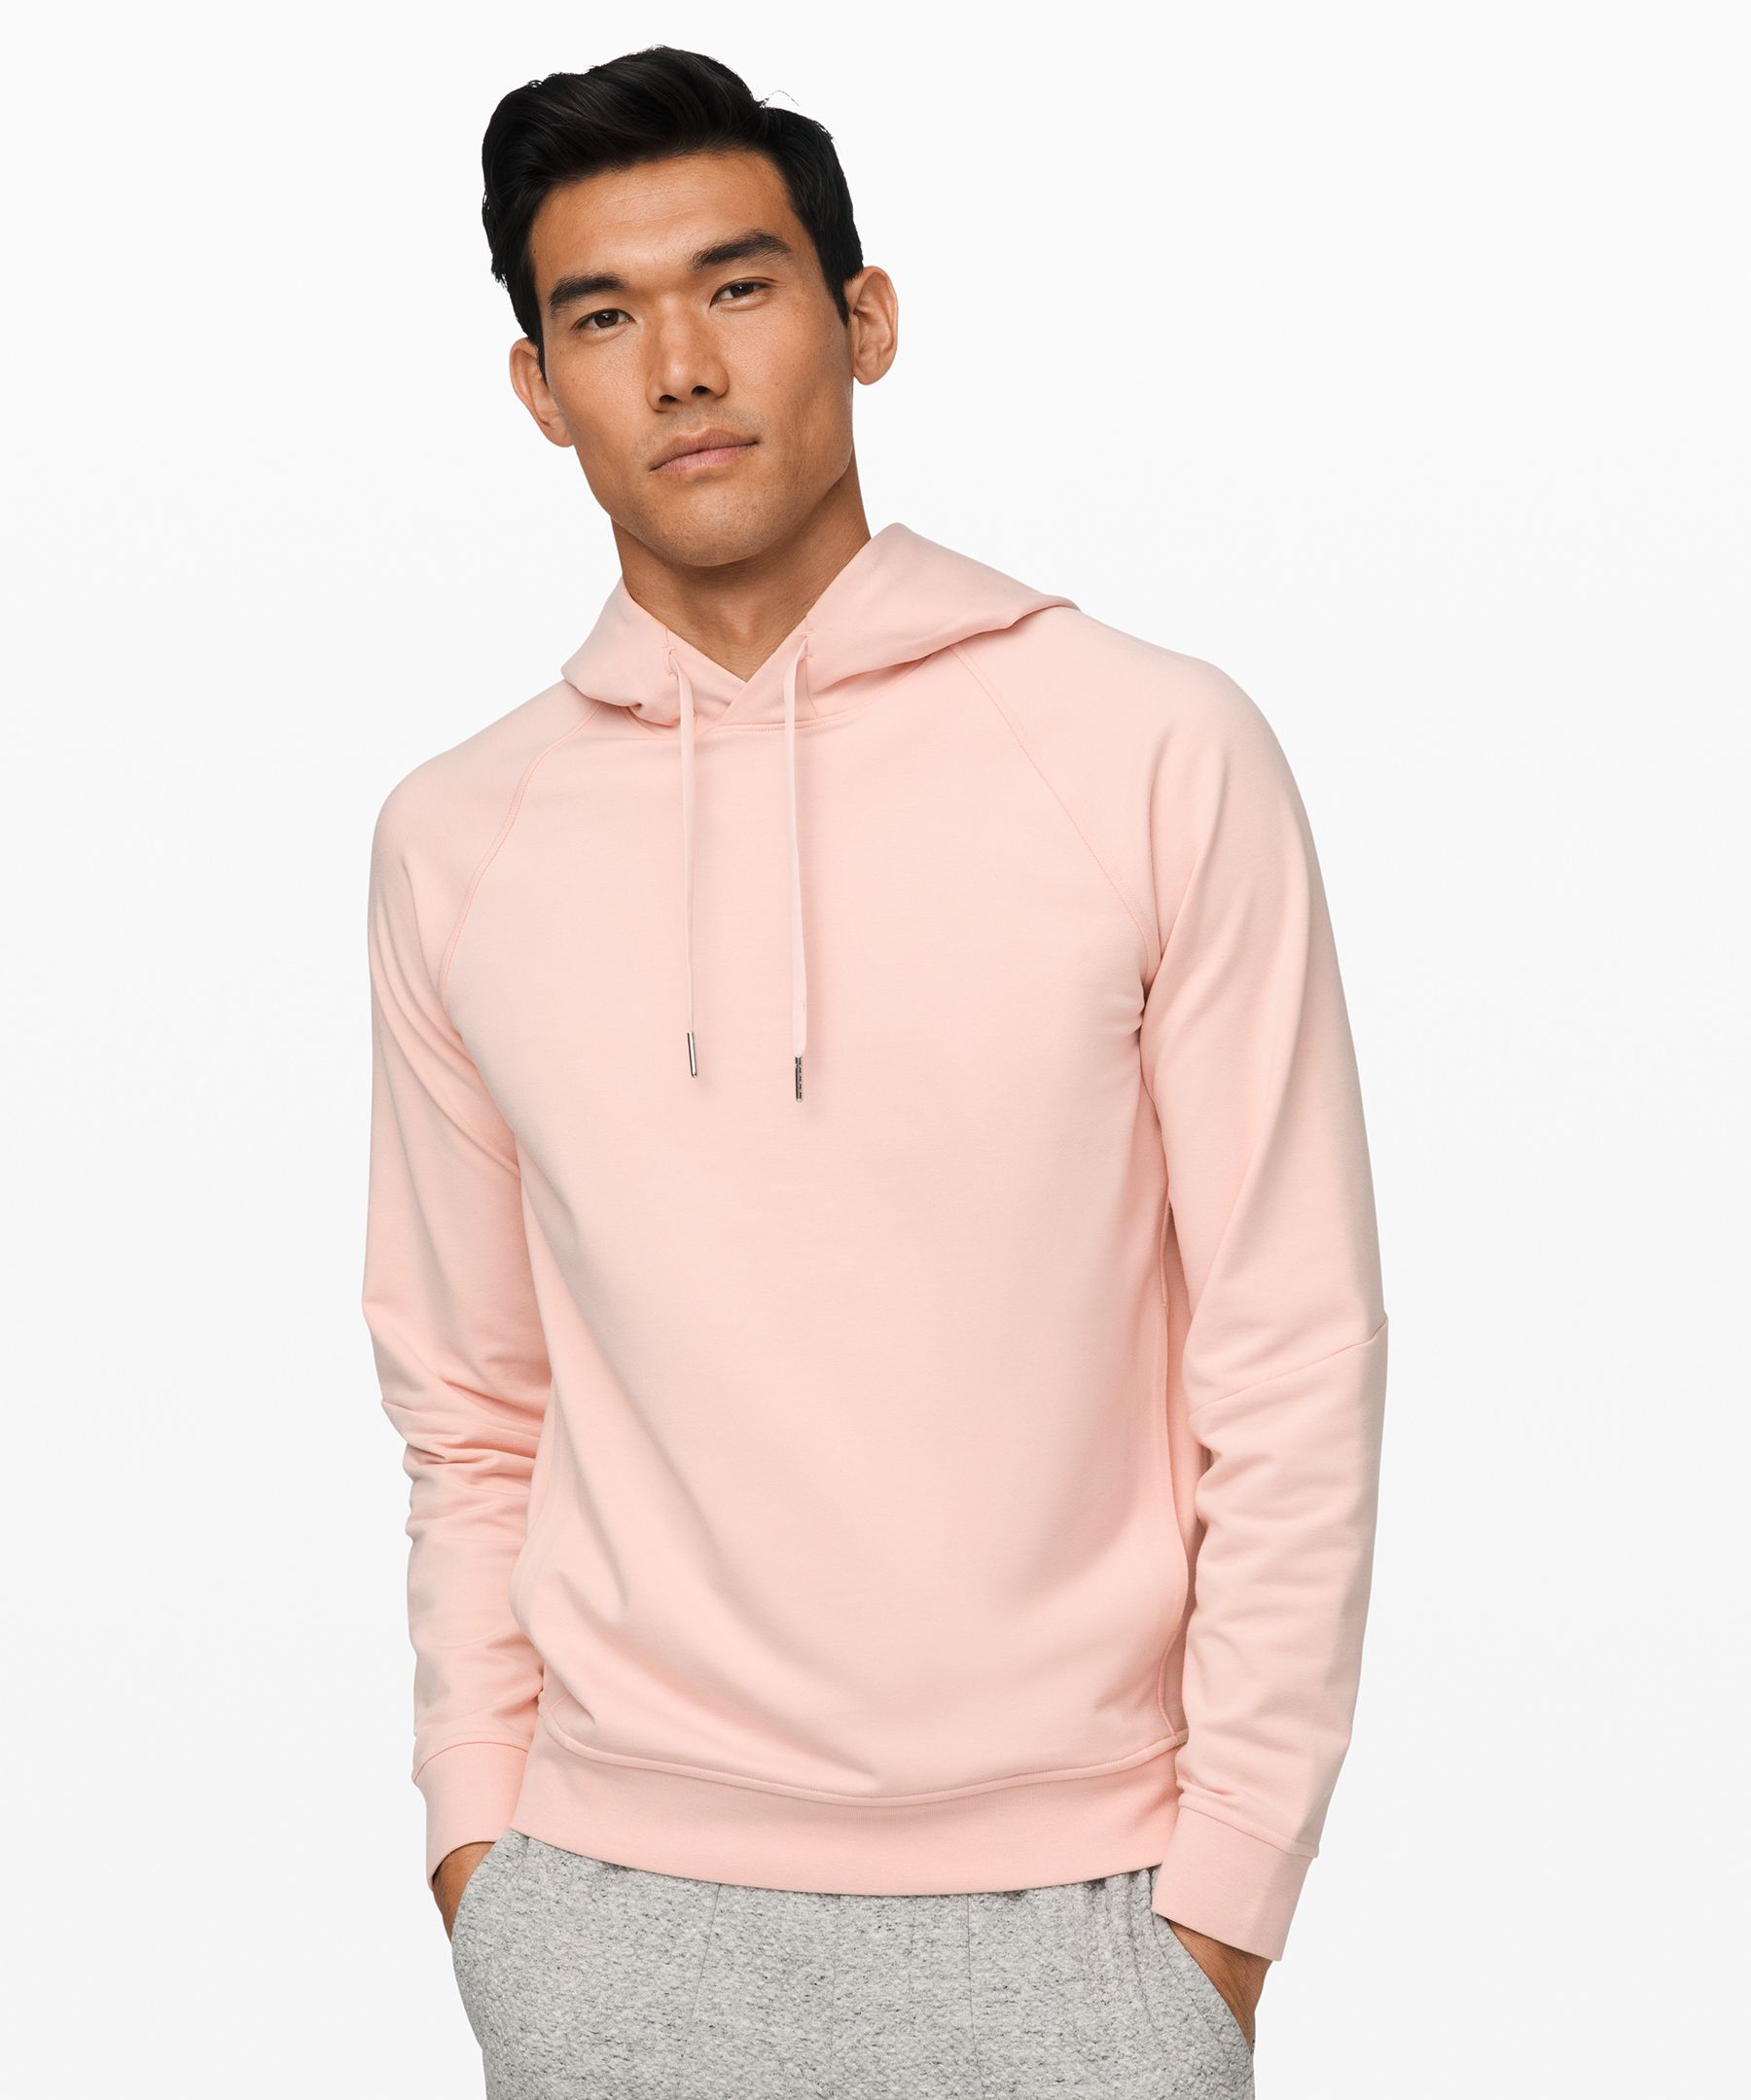 Lululemon City Sweat Pullover Hoodie French Terry In Orange